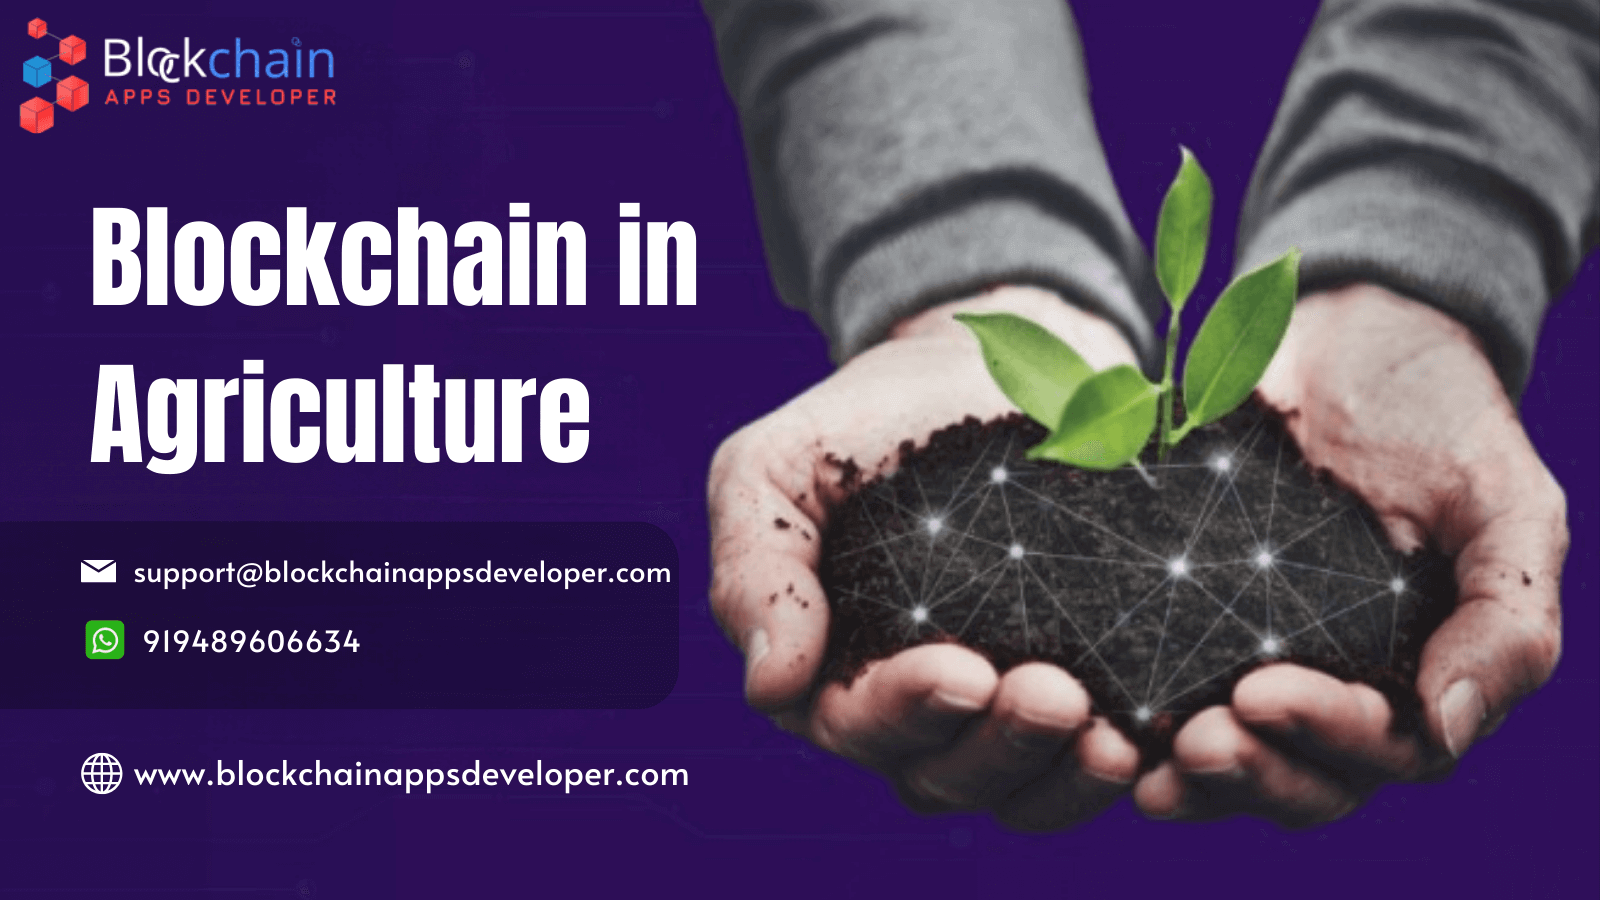 Blockchain-Driven Agricultural Solutions: Transforming Food Production